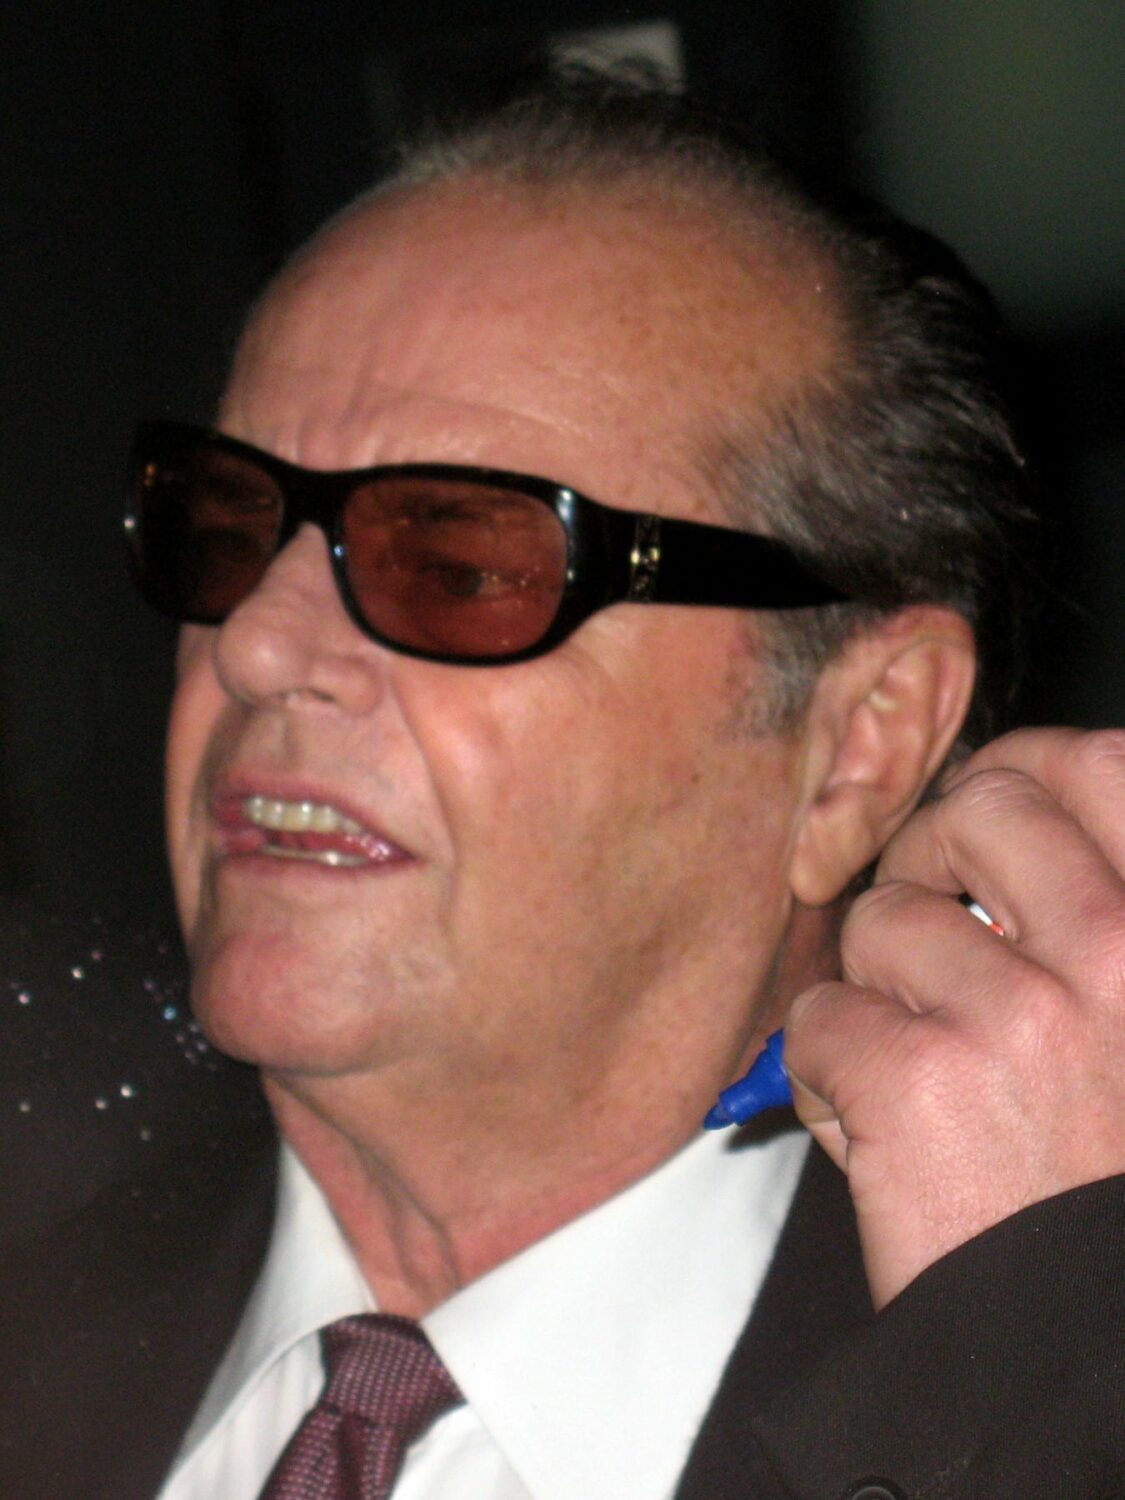 Jack Nicholson. De Franz Richter (User:FRZ) - own work (taken with Canon PowerShot A640), CC BY-SA 2.5, https://commons.wikimedia.org/w/index.php?curid=3437615